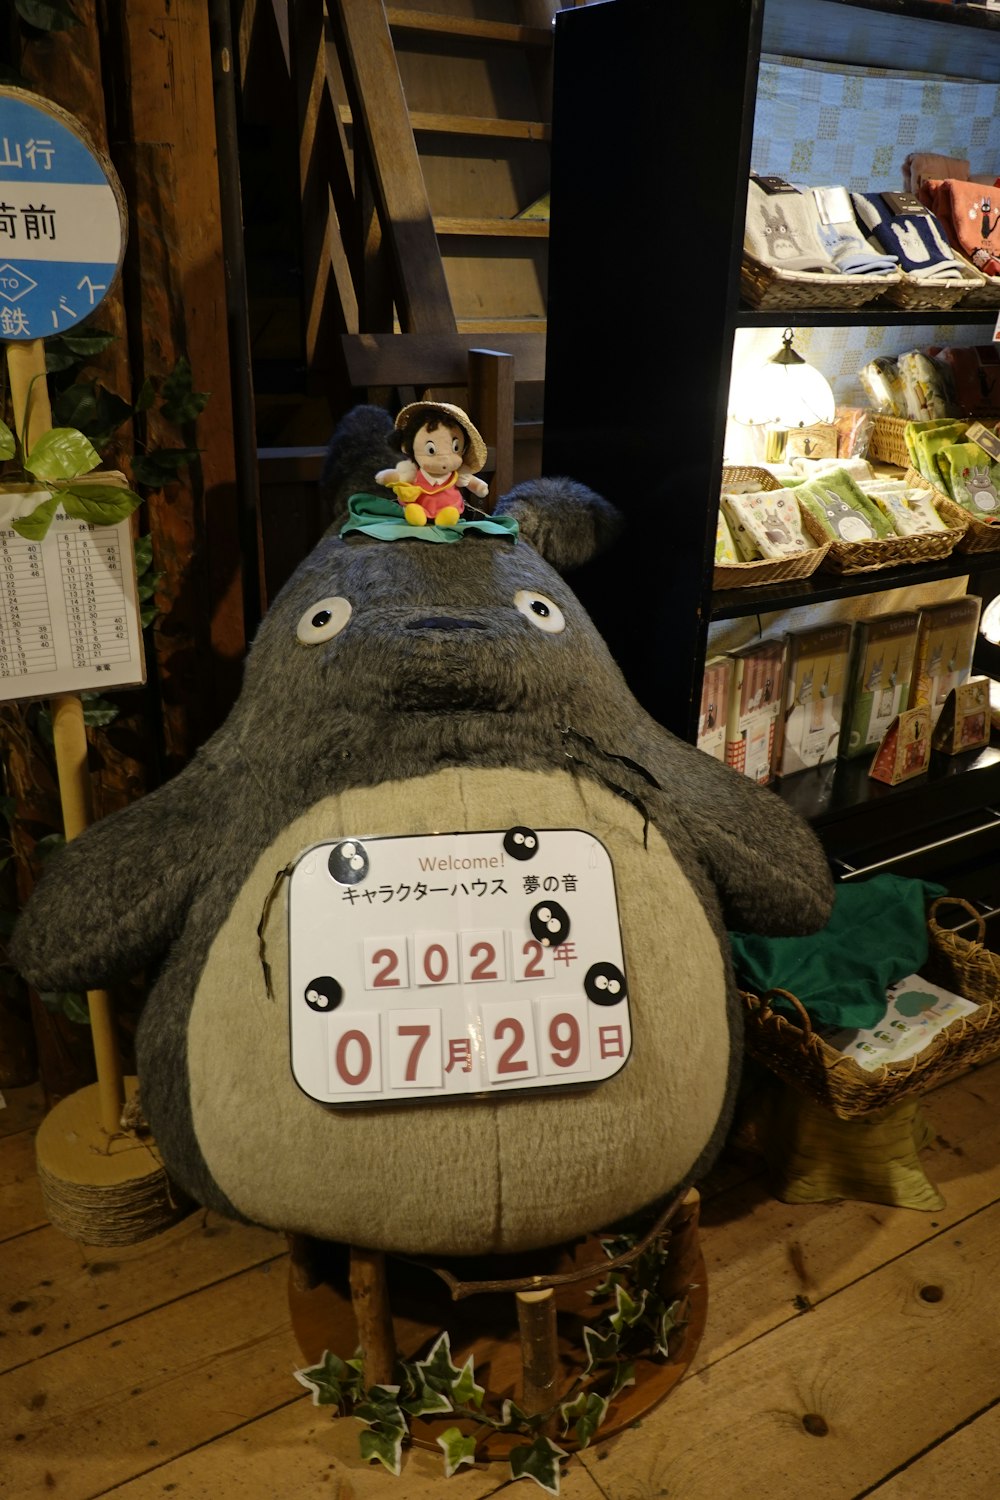 a large stuffed animal sitting on top of a wooden floor